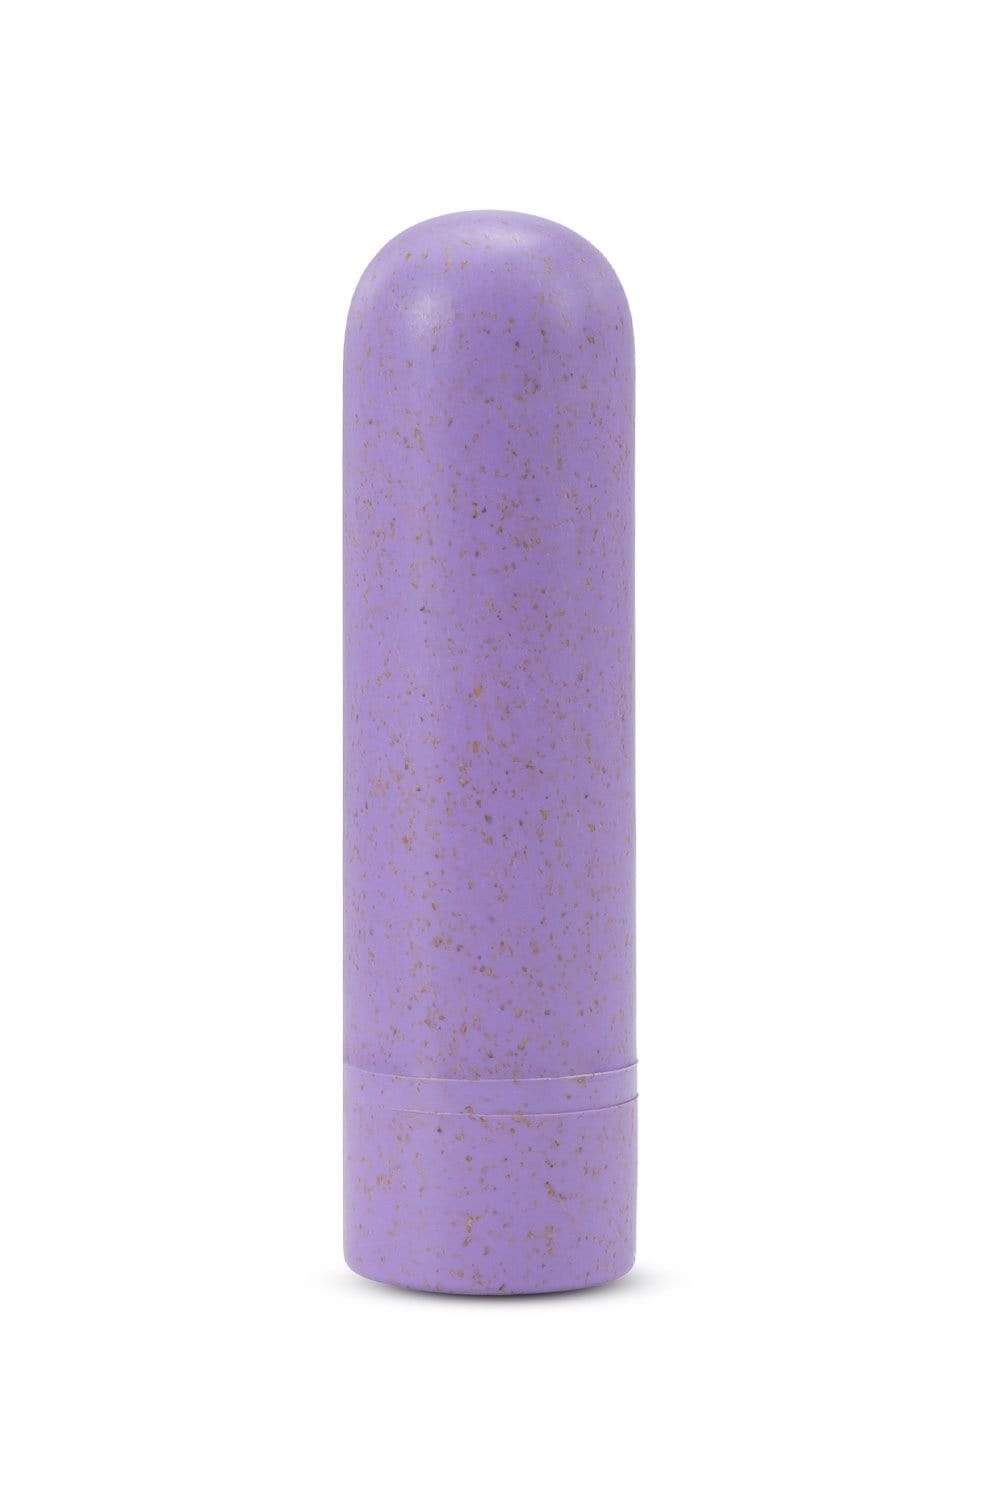 Gaia Eco Lilac Rechargeable Bullet